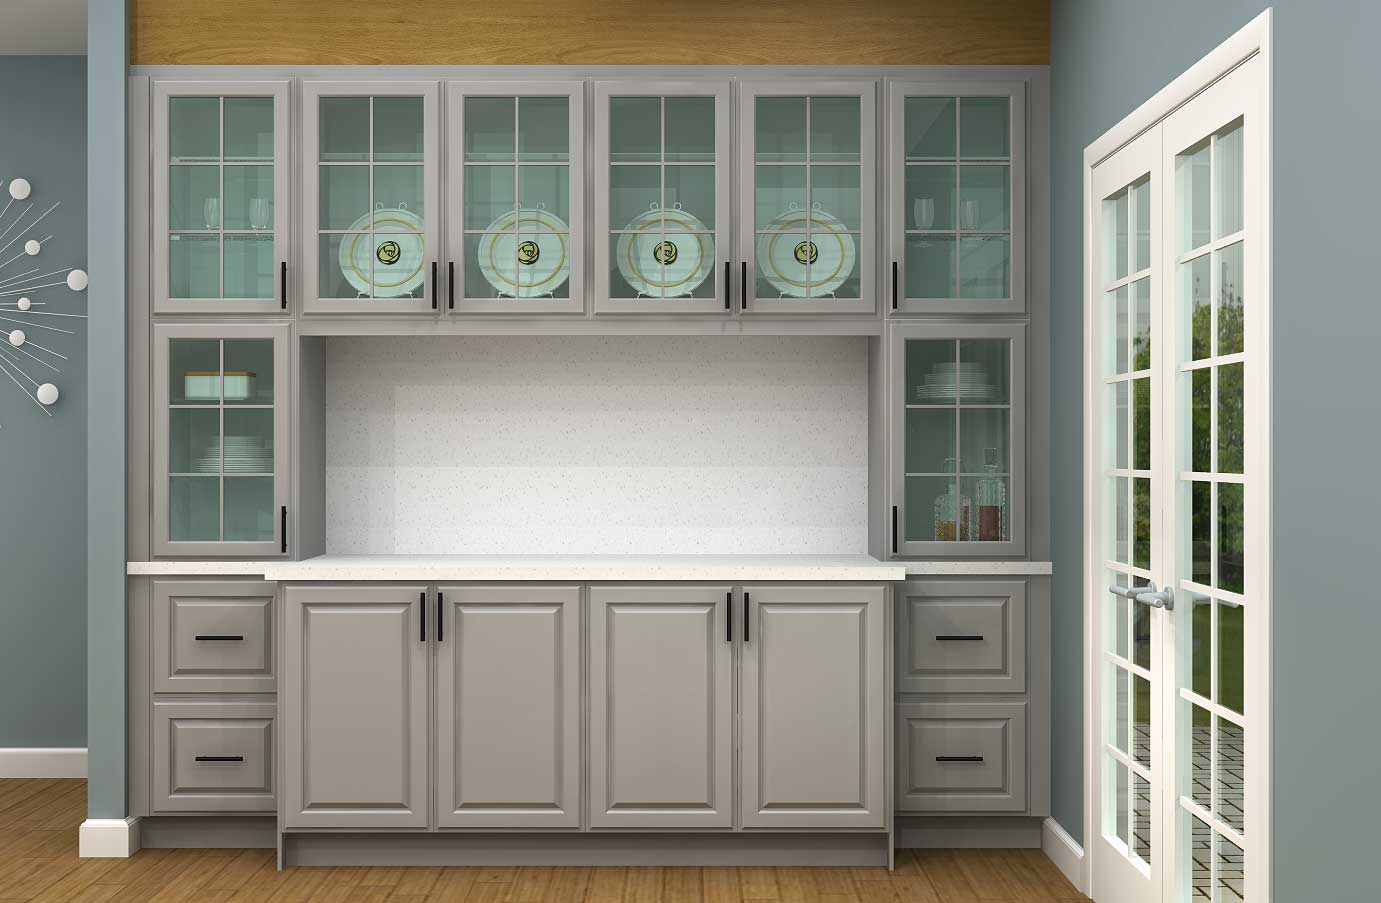 IKEA cabinets in your home 3